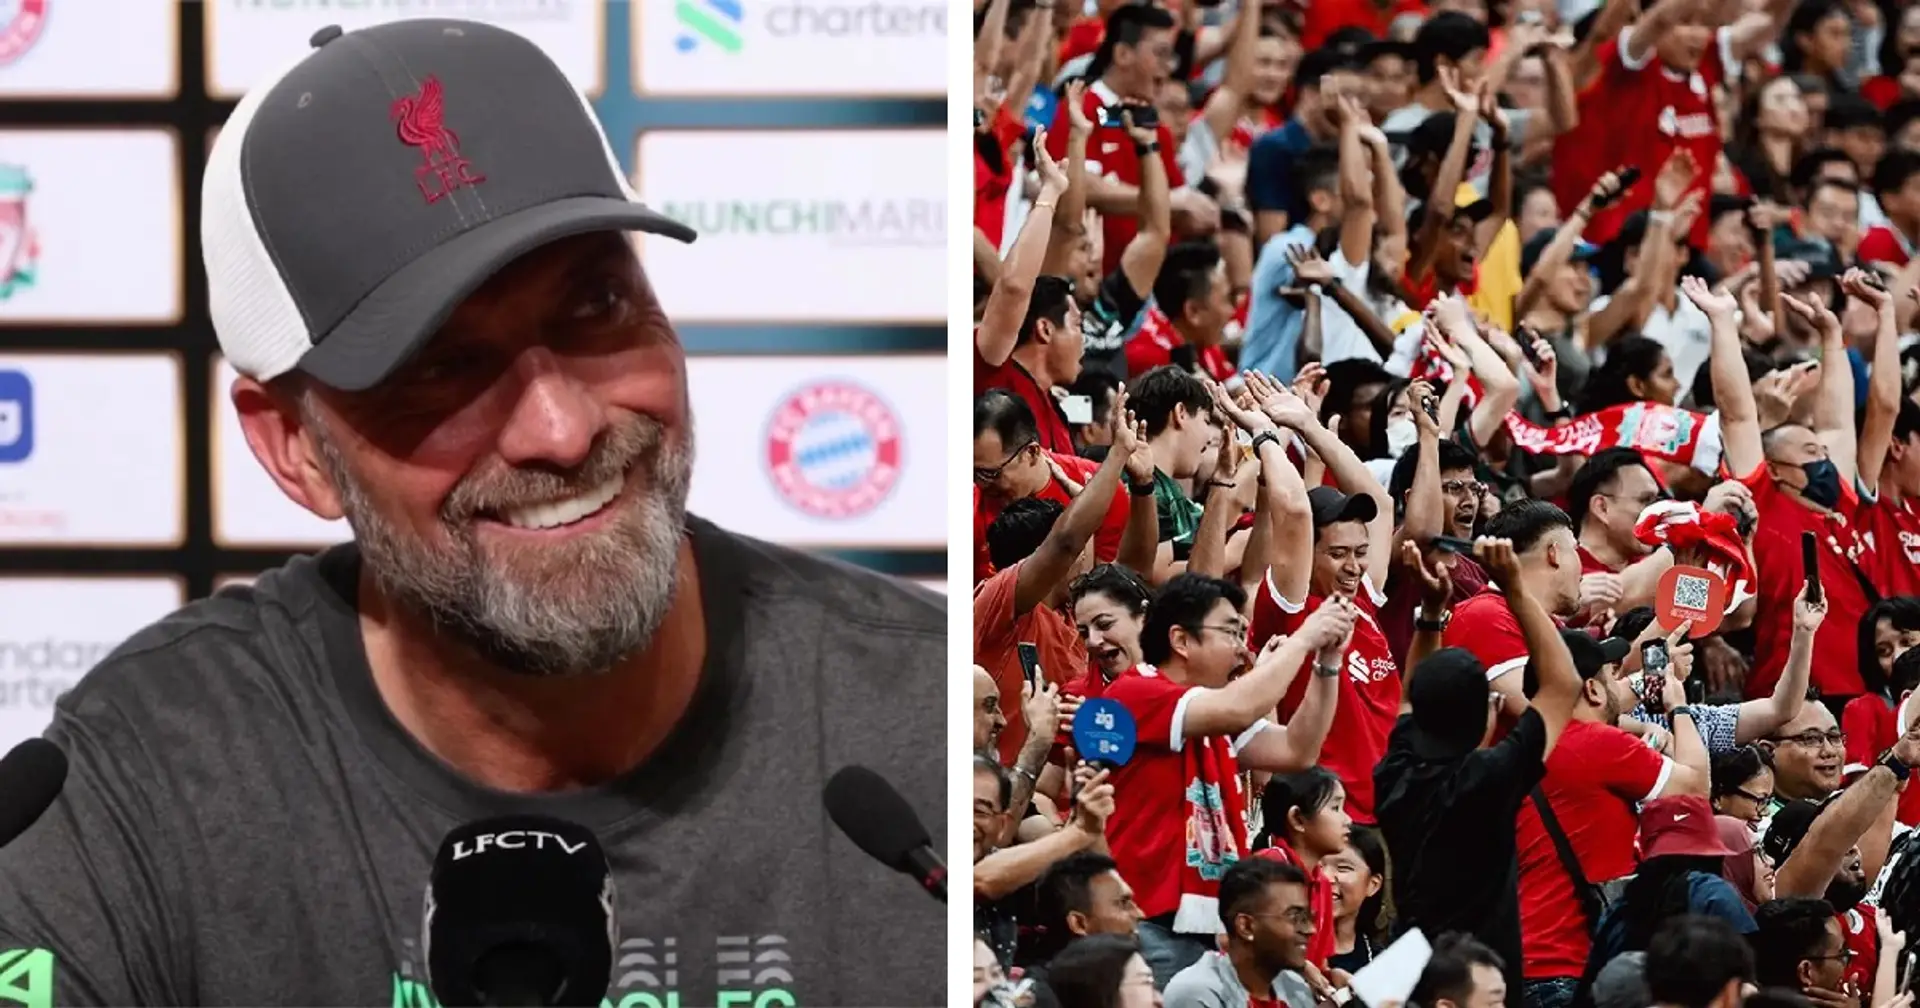 'I'll be really happy if I can open a door and nobody is cheering!': Klopp on fanatic support in Singapore